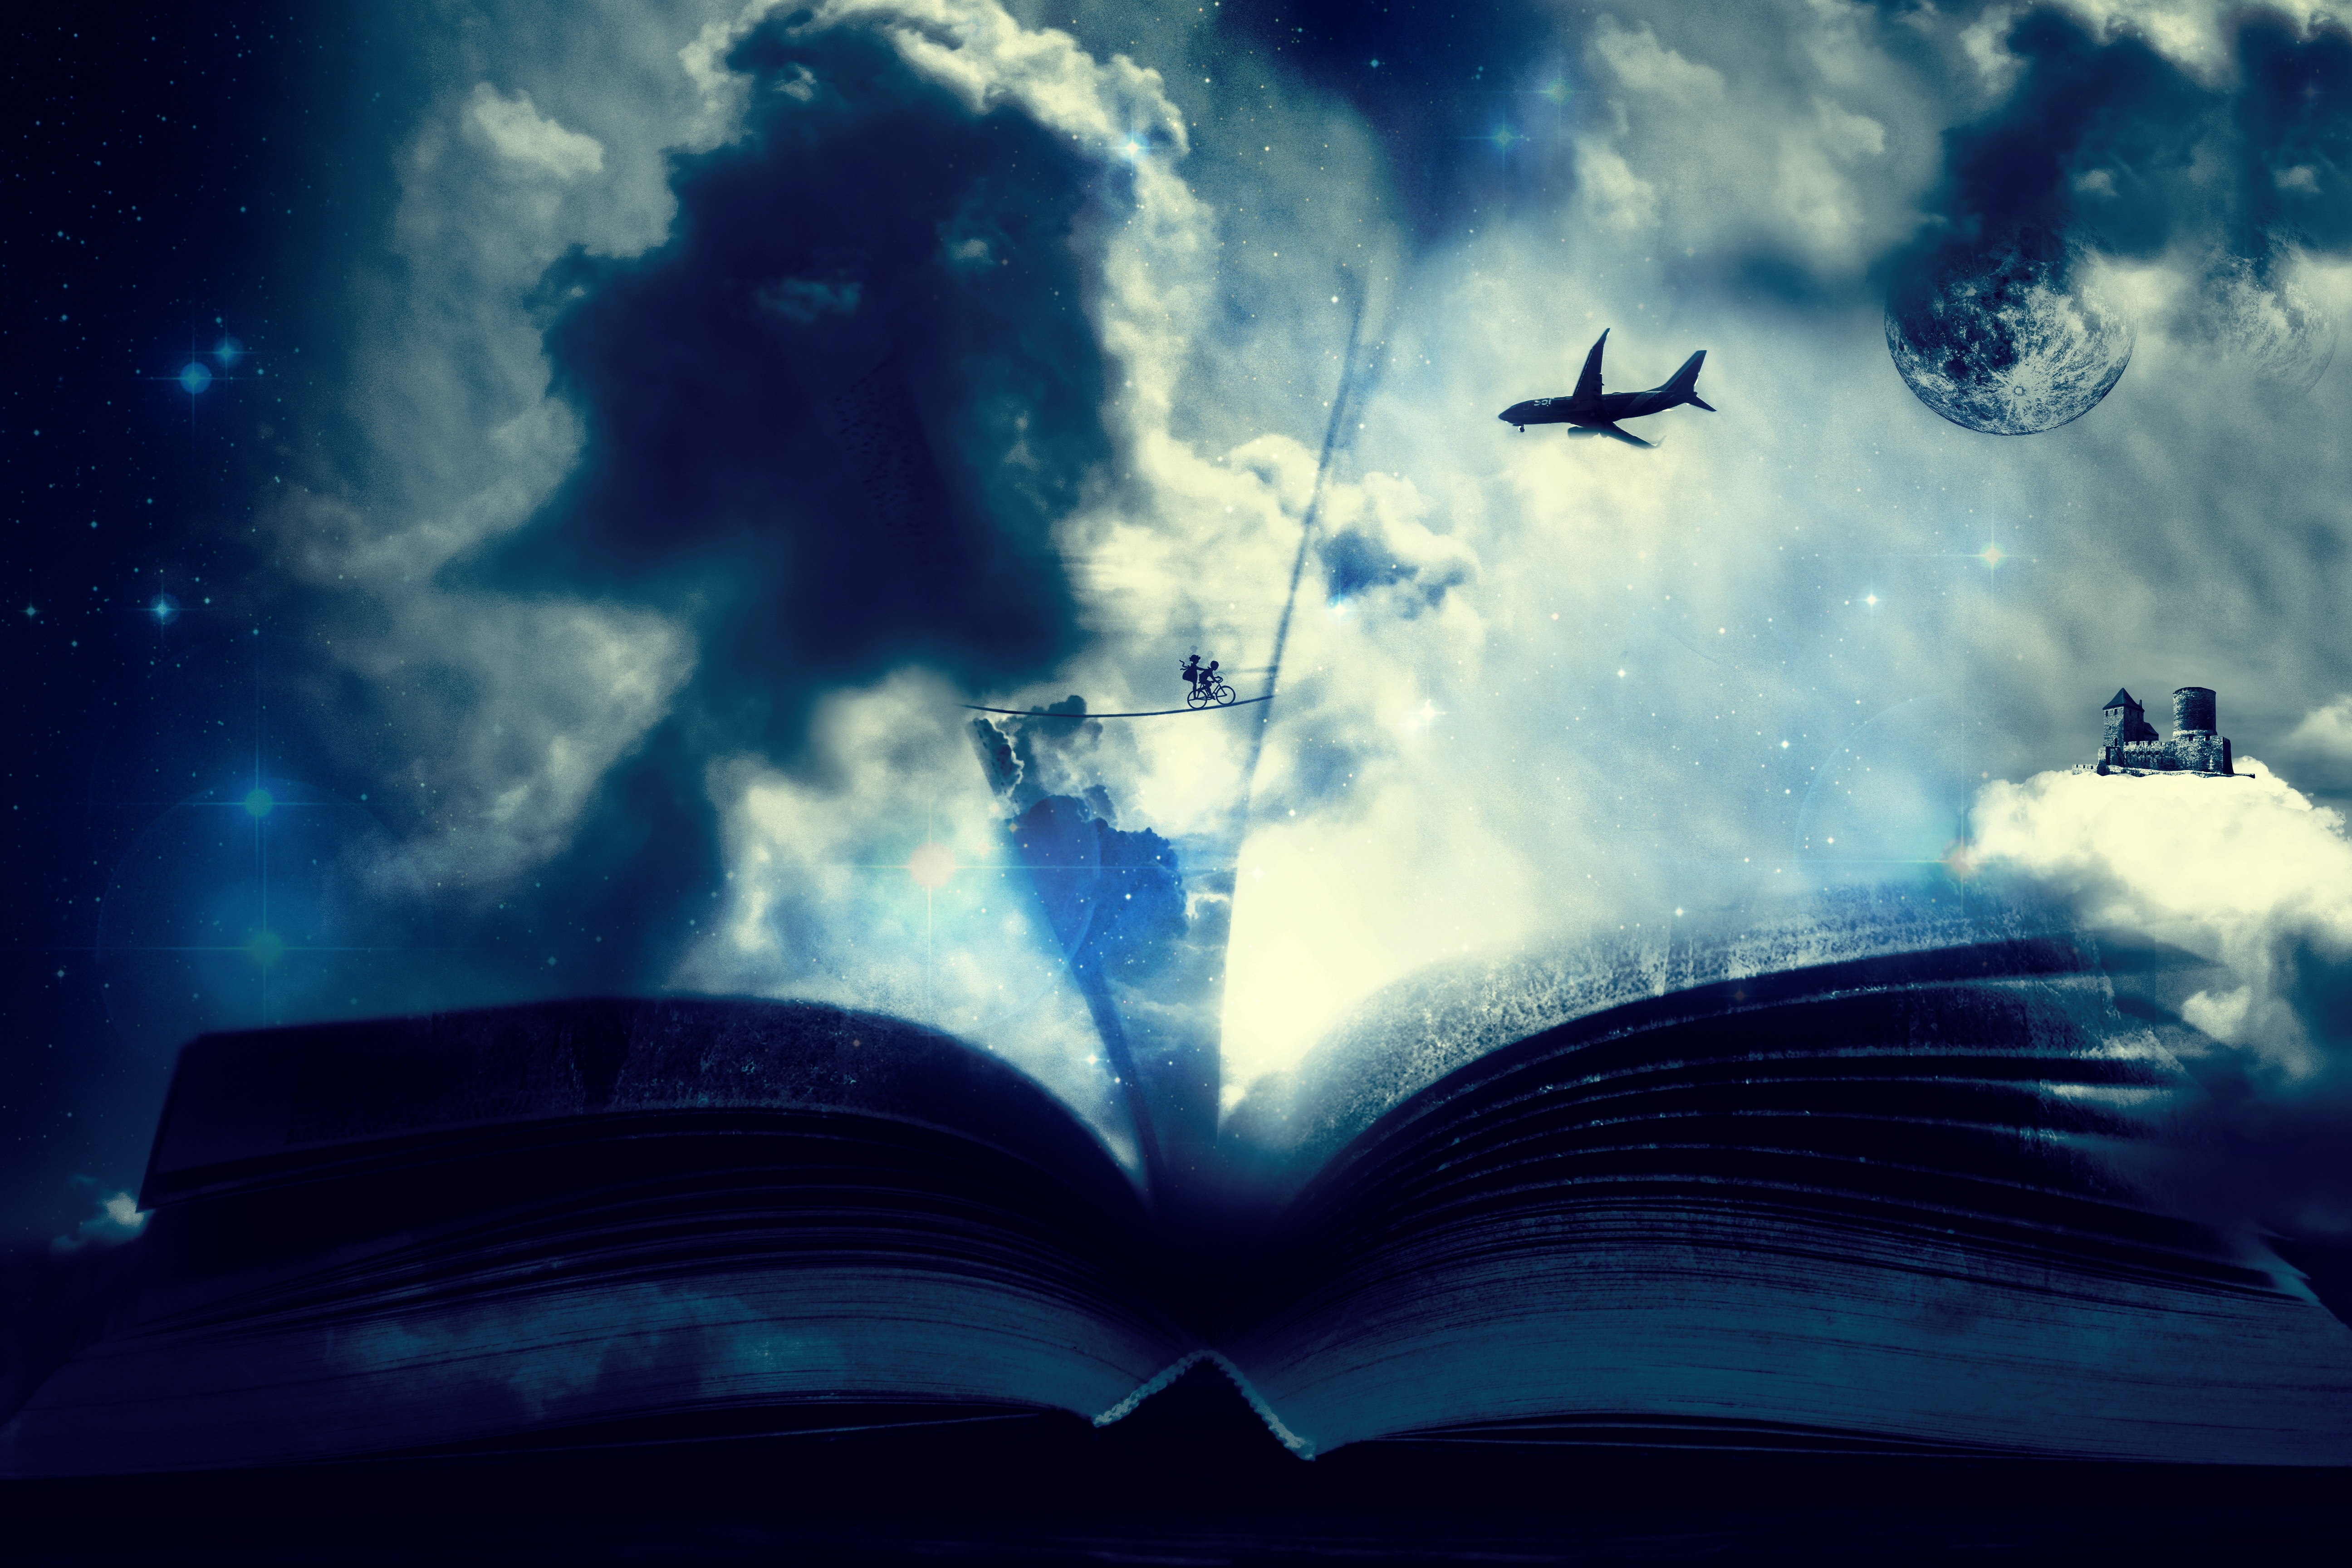 book, plane, fantasy, art, clouds, airplane, bicycle